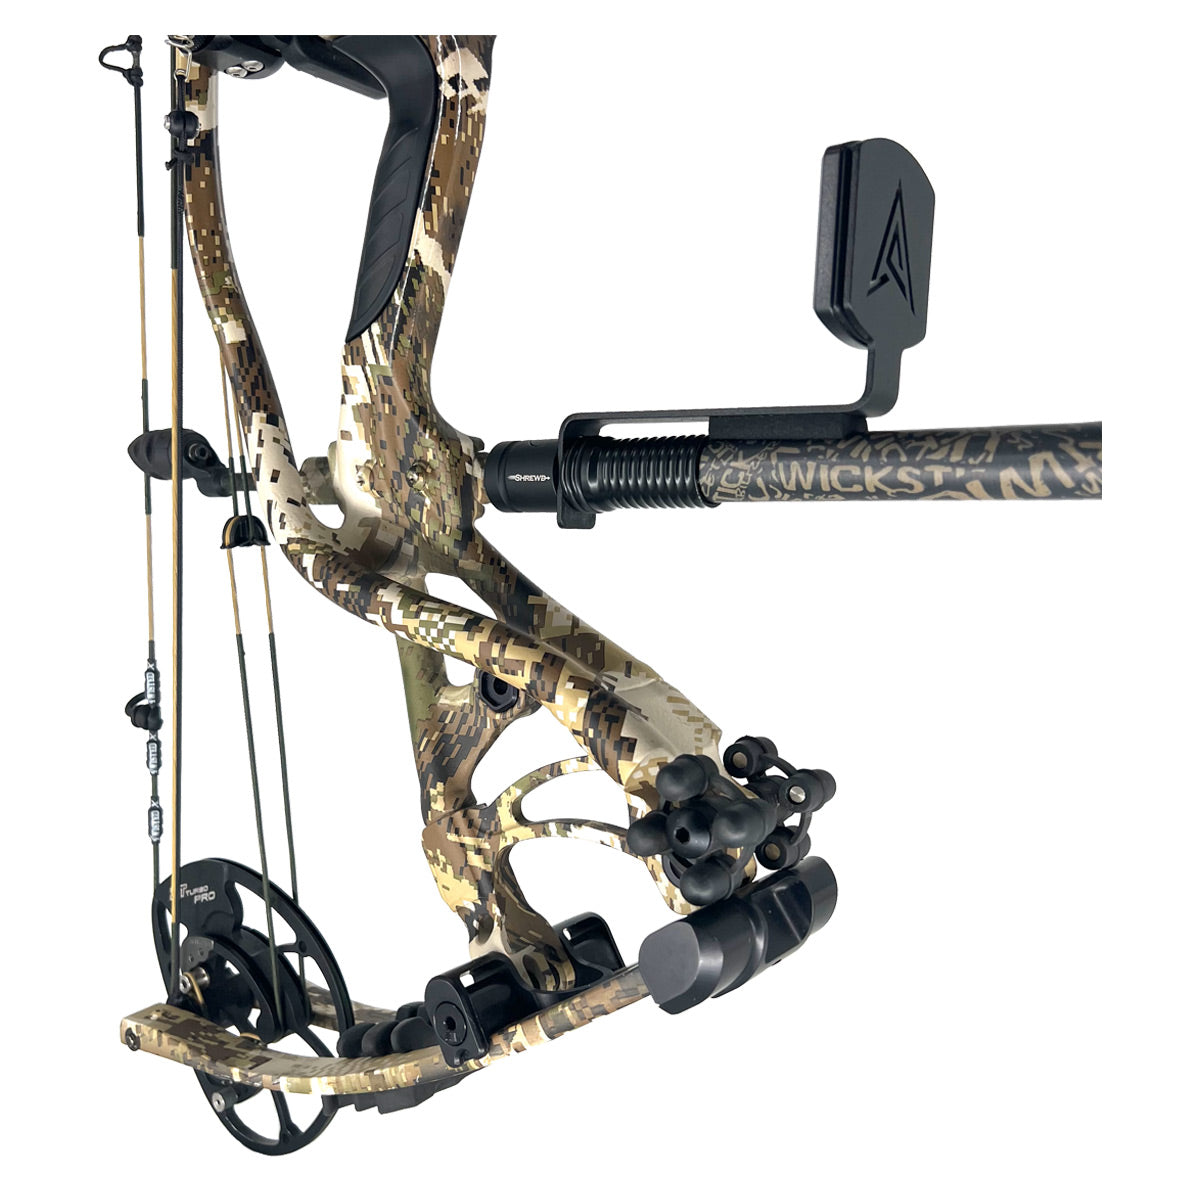 Painted Arrow Outdoors Mag-Pro Plus in  by GOHUNT | Painted Arrow Outdoors - GOHUNT Shop